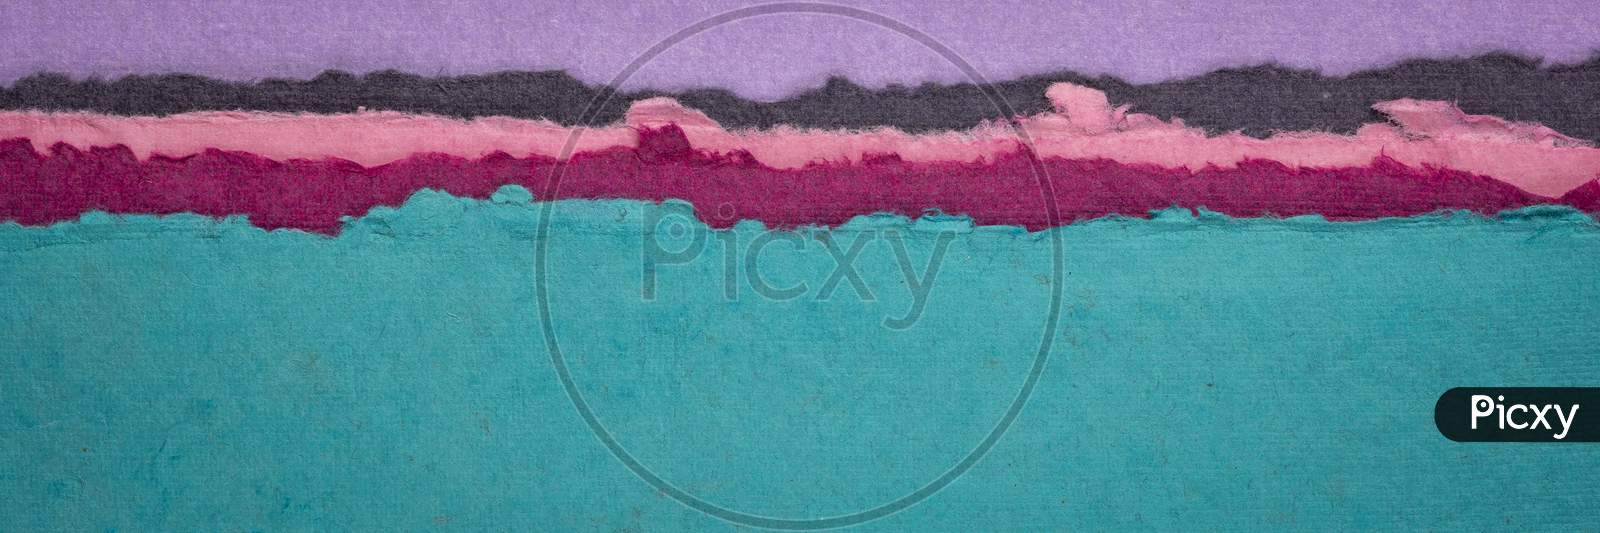 Purple Sunset Or Sunrise Abstract Landscape - A Collection Of Colorful Handmade Indian Papers Produced From Recycled Cotton Fabric, Panoramic Web Banner